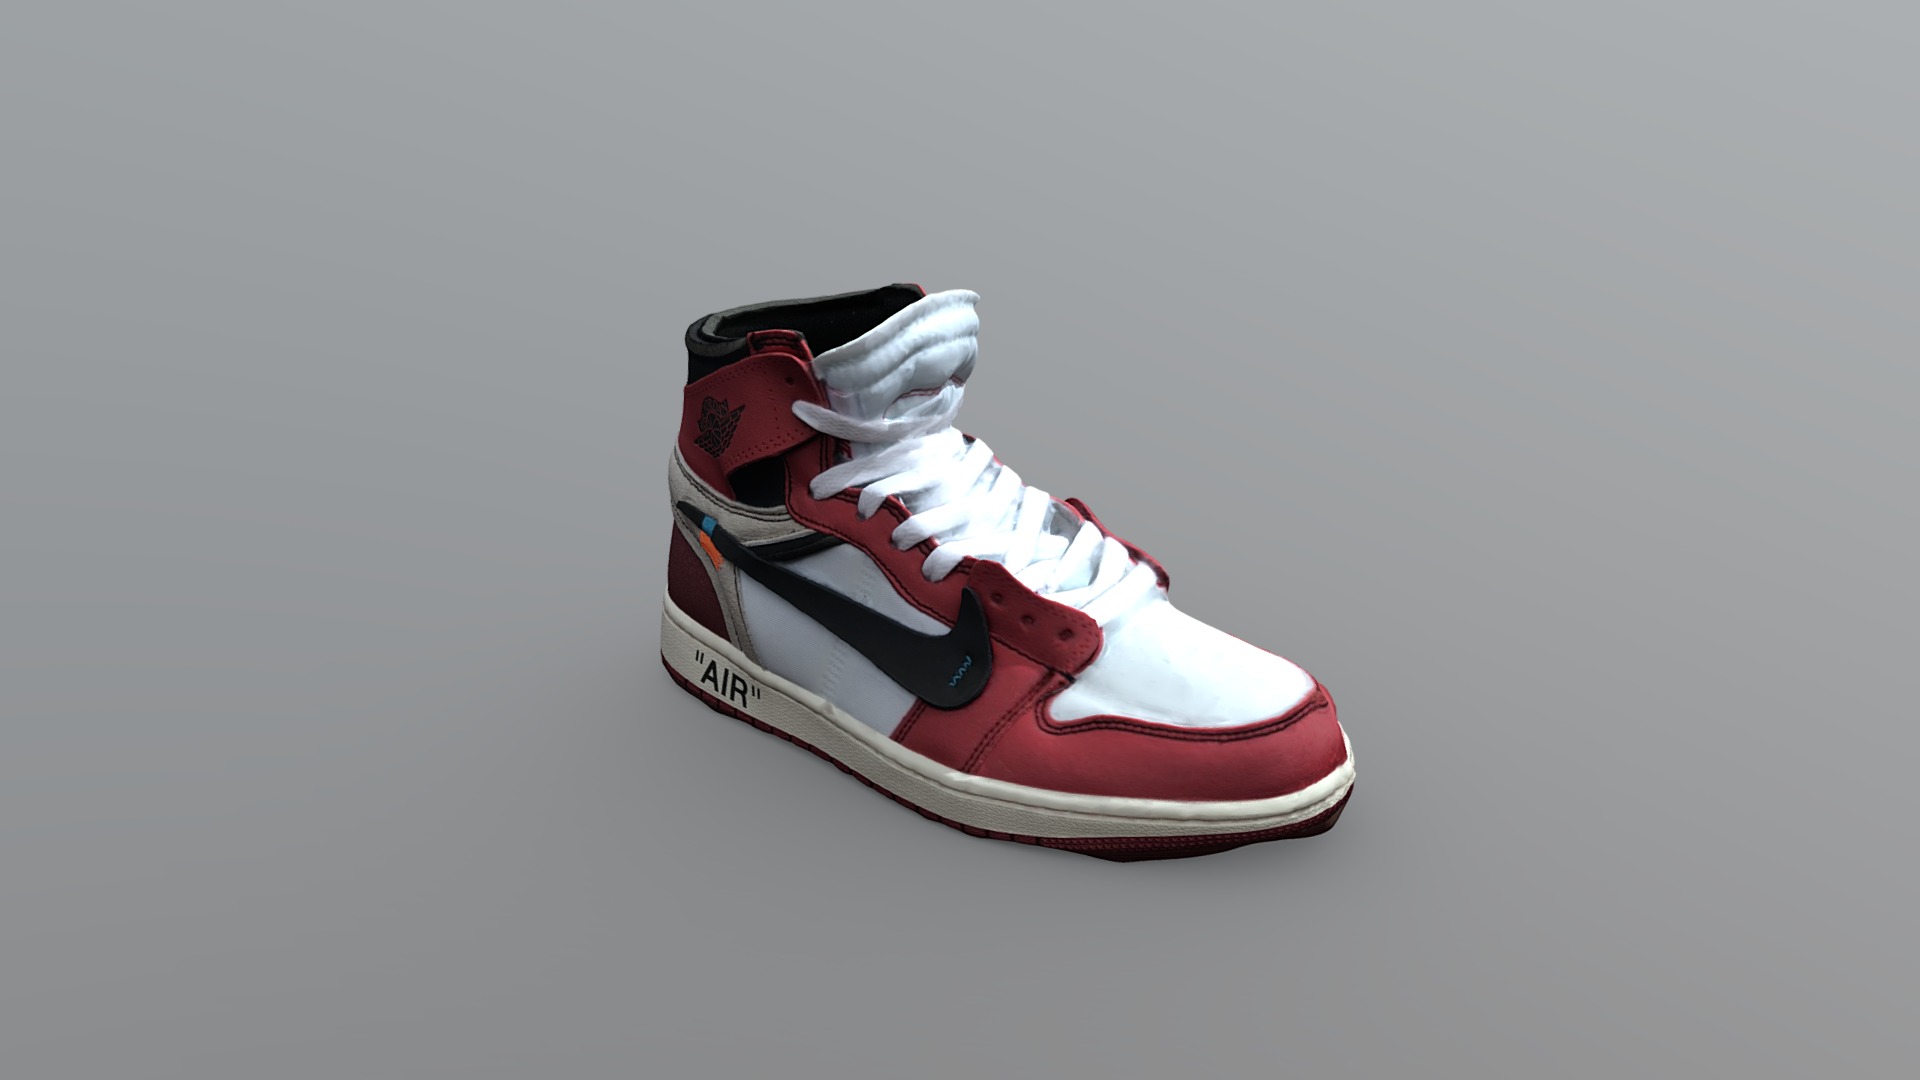 3D model Off-White x Nike Air Jordan 1 Shoe (White laces) - This is a 3D model of the Off-White x Nike Air Jordan 1 Shoe (White laces). The 3D model is about a red and white shoe.